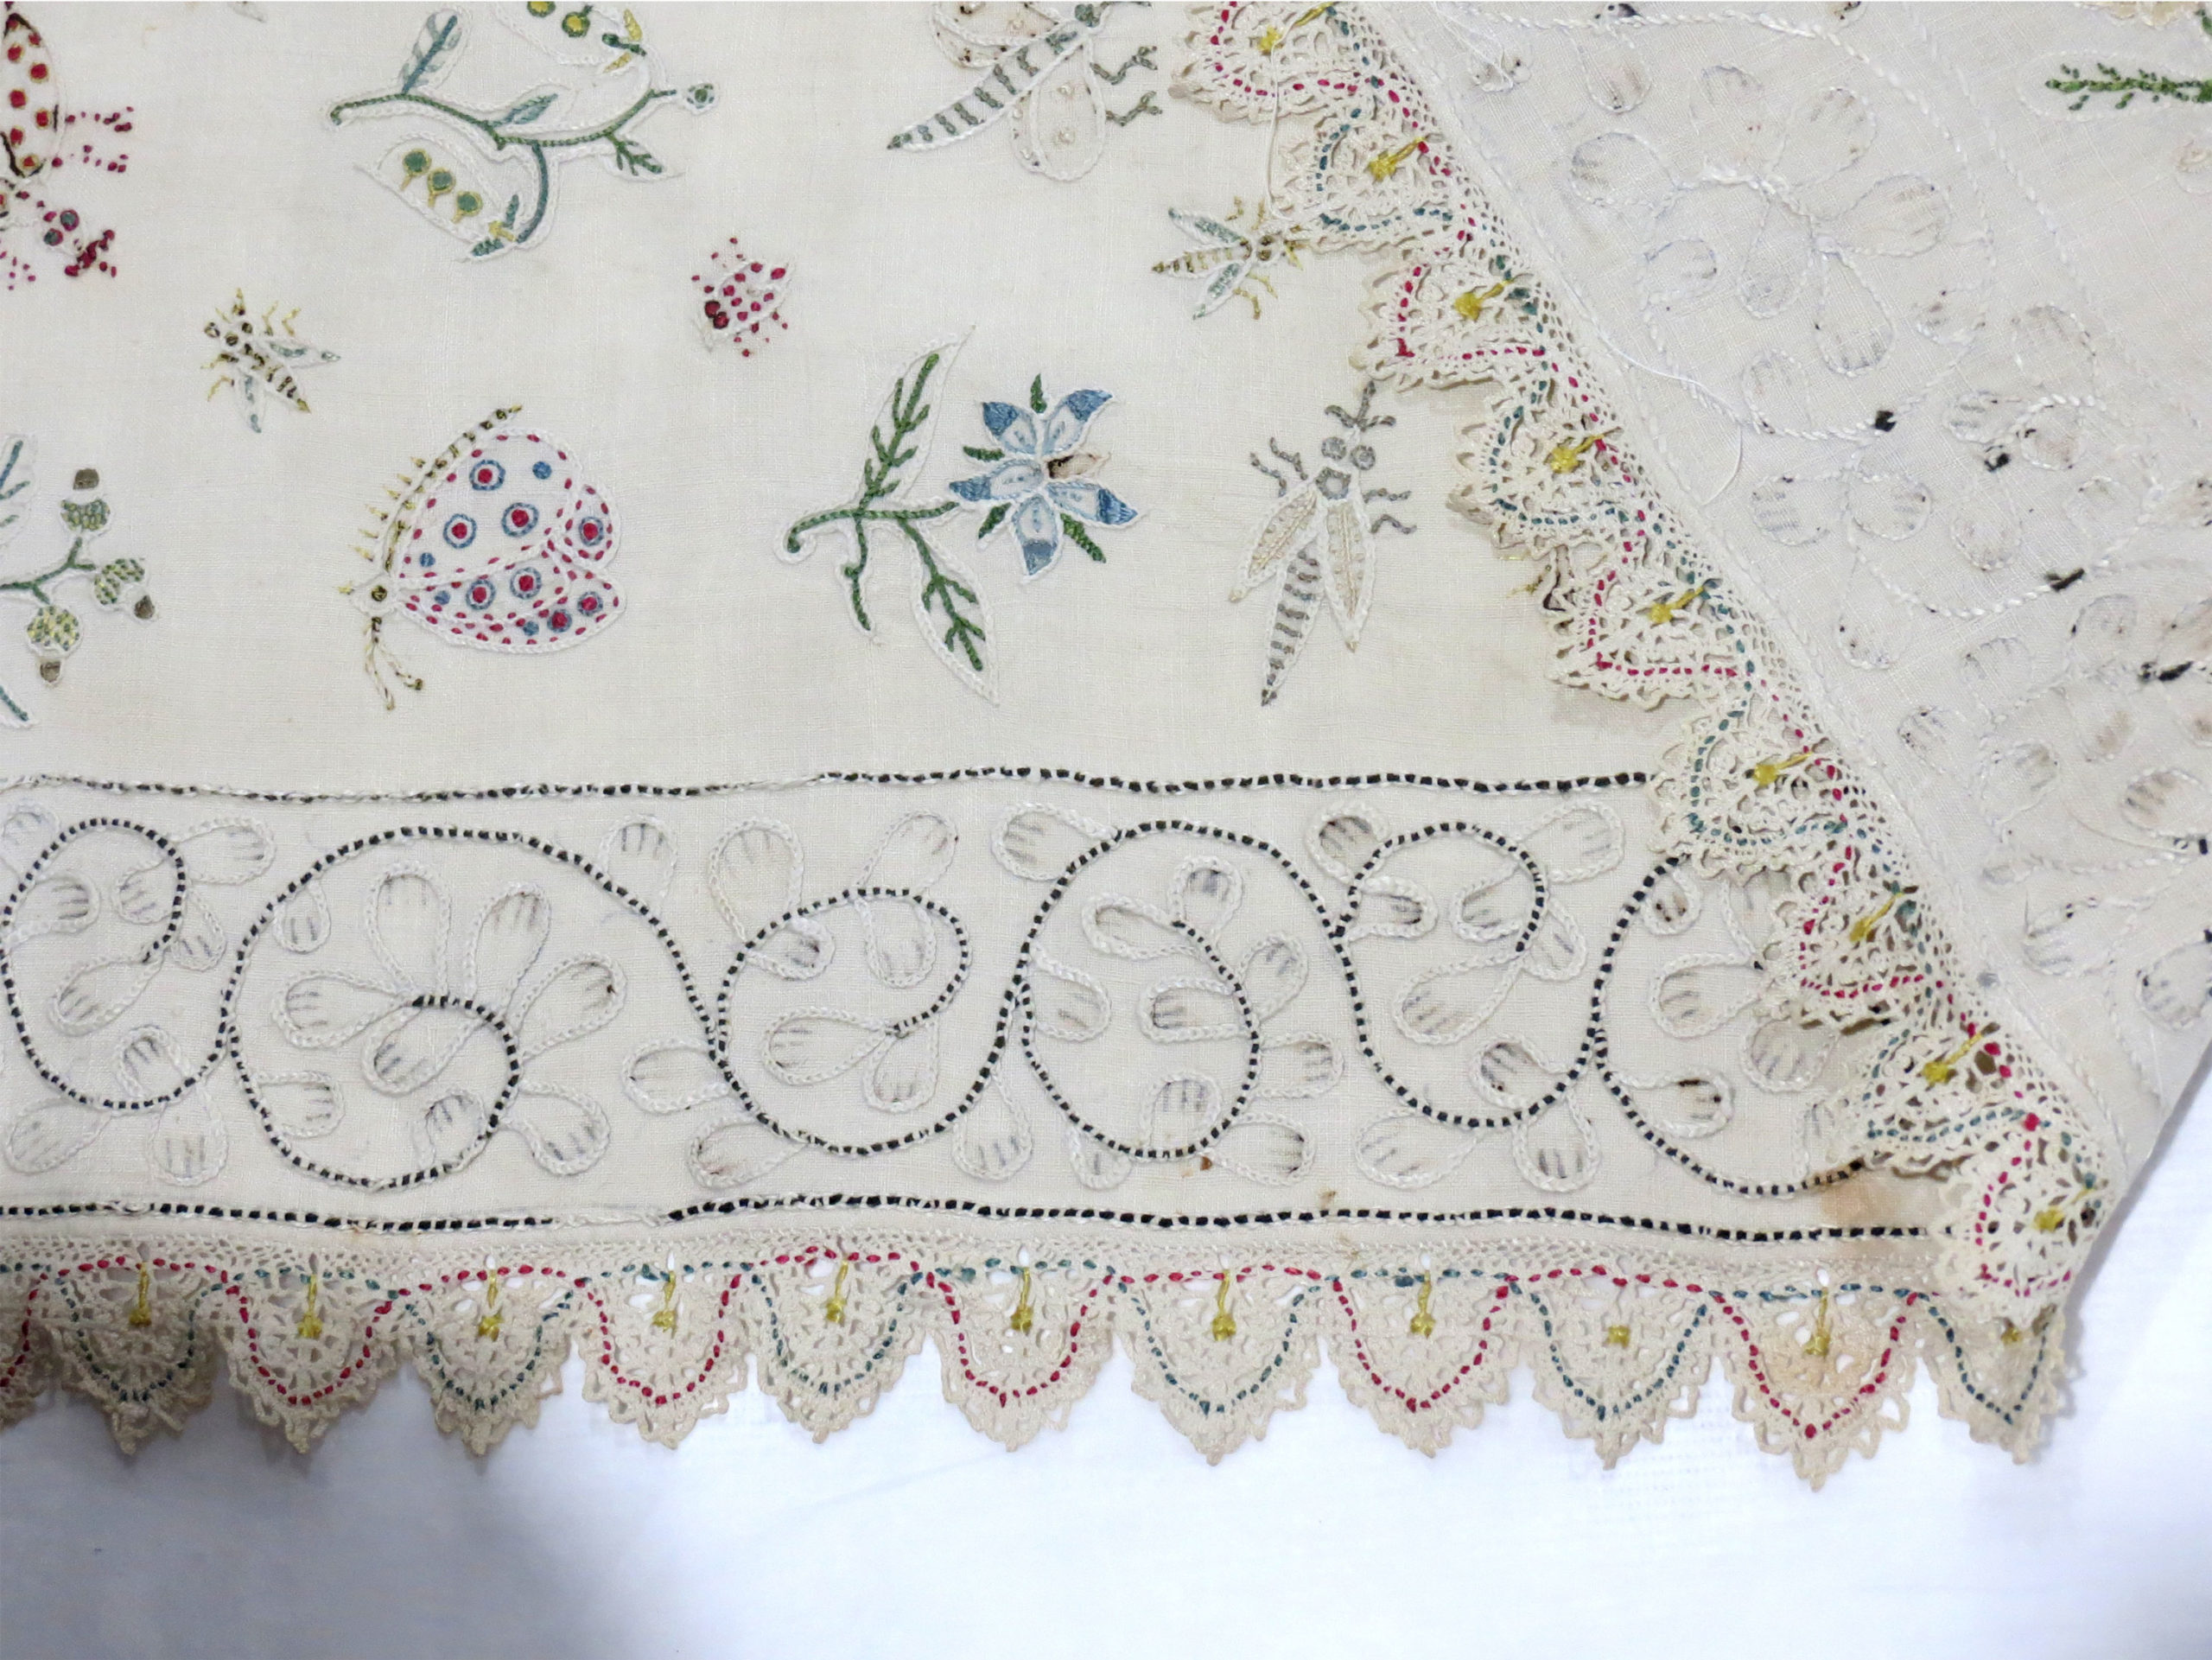 White linen embroidered in coloured silks and white linen threads with bands of birds, insects, flowers, fruit, etc. bordered by a narrower bands of scrolling vines; edging of white bobbin lace run with coloured silks.